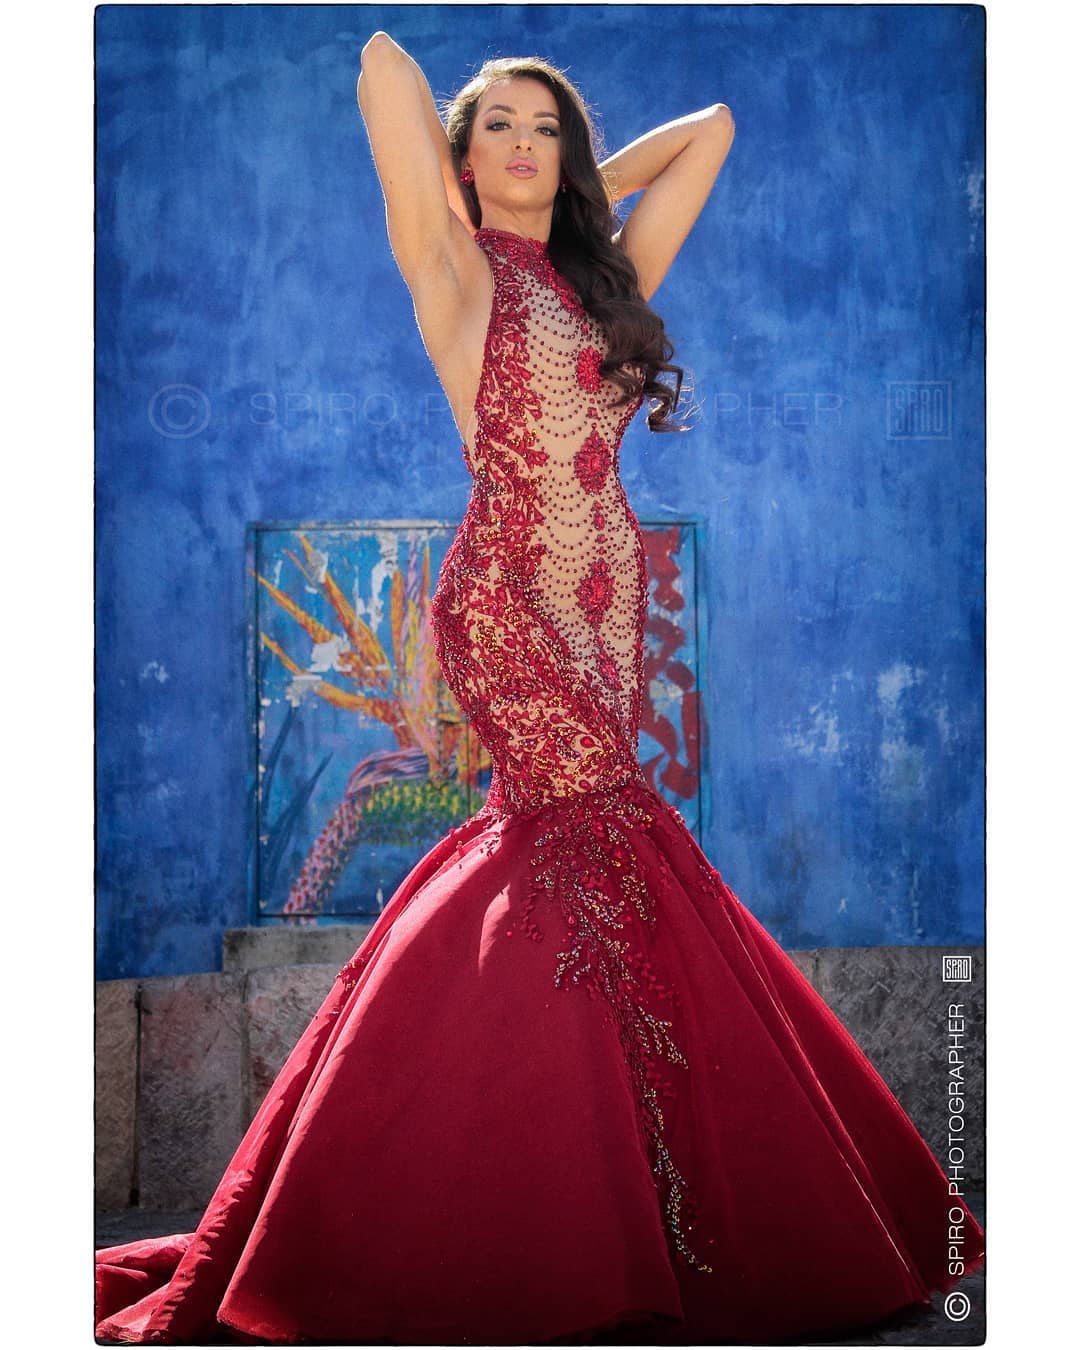 Beautiful,
Ashleigh @ashleighwild_ 
@missglobalengland_ 

Wearing only the very finest in evening gowns from the renowned, 
Leo Almodal @leoalmodal 

Photographed in Oaxaca city, 
for @missglobalofficial 

copyright
📷 © @spiro_photographer 
Spiro Polichronopoulos 

Assistant: @dabeatlo 
Coach & syling: @iam_seydinaallen 

#ellegance #gorgeous #shapely #model #modeling #eveninggowns #eveninglook #red #woman #photography #photographerlife #photoshoot #missglobalofficial #oaxacafotografo #oaxaca #england #beauty #bestjobintheworld #bestjobever #luckyme